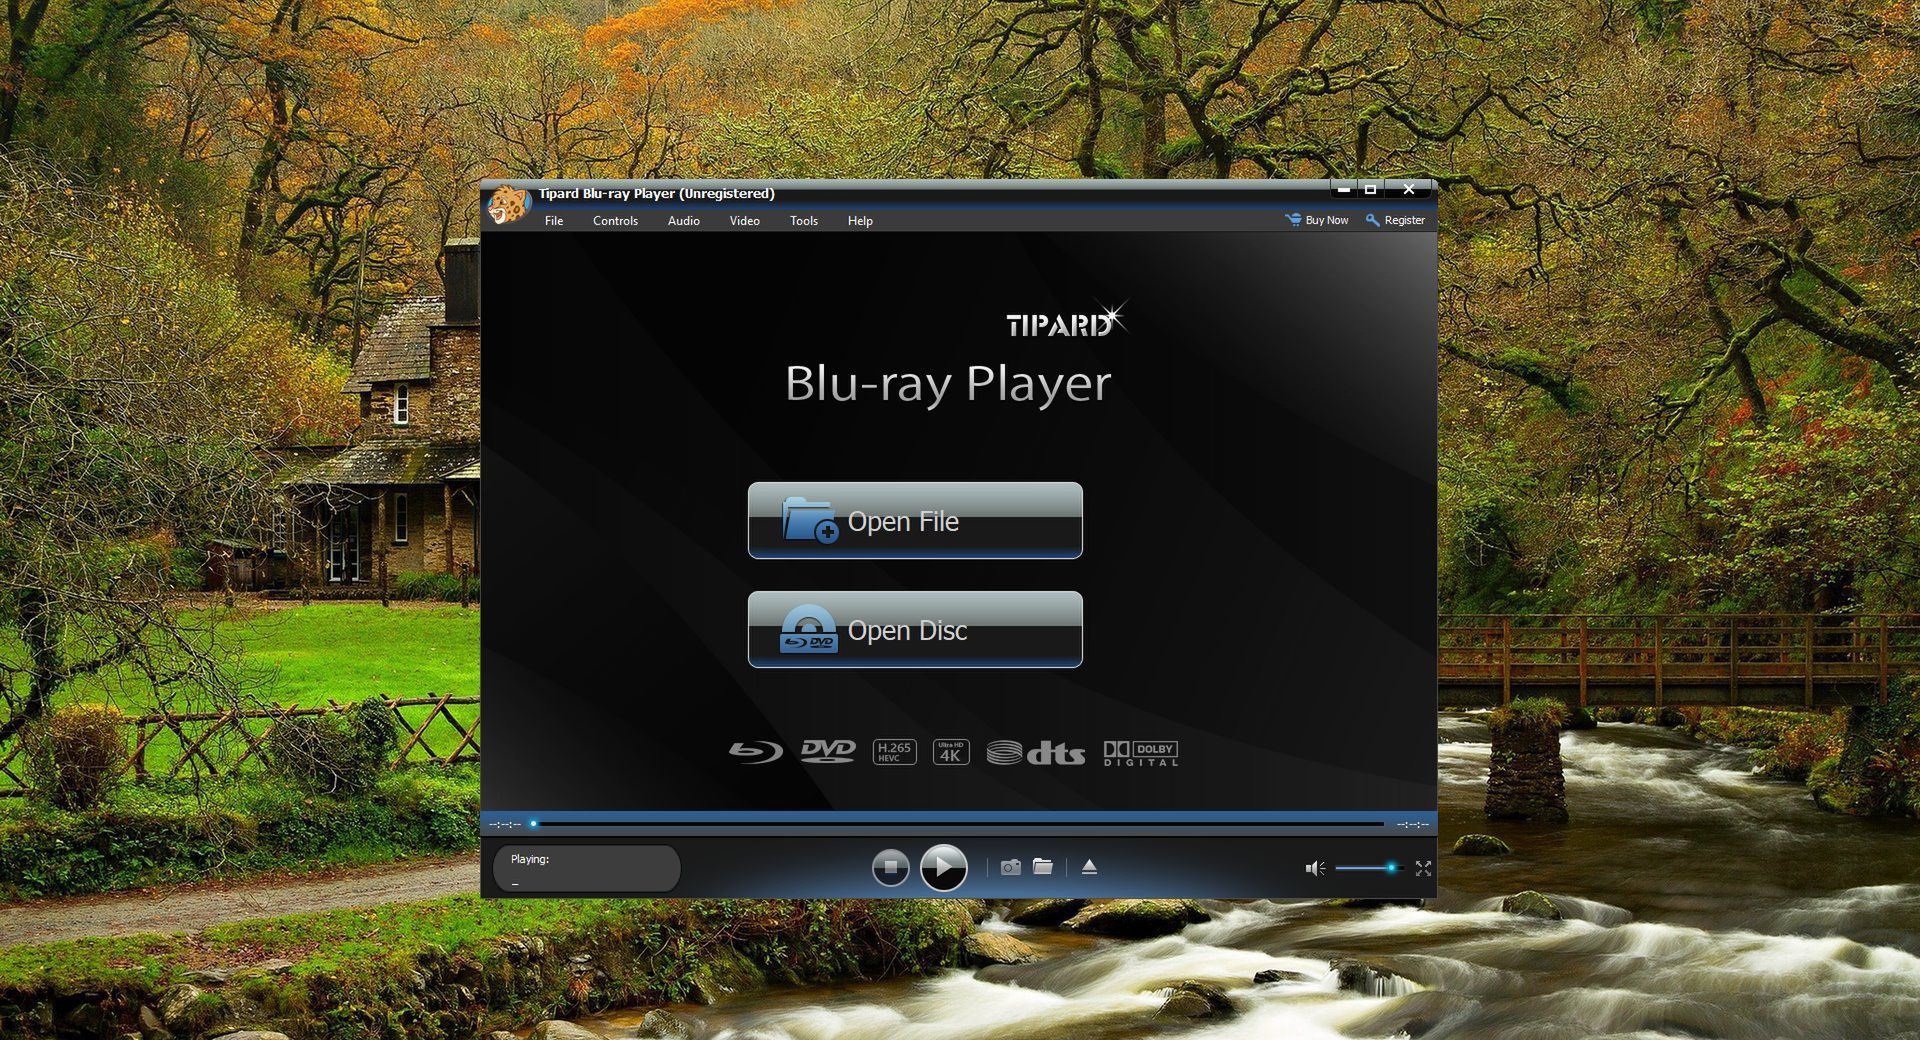 Tipard Blu-ray Player 6.3.38 download the last version for iphone